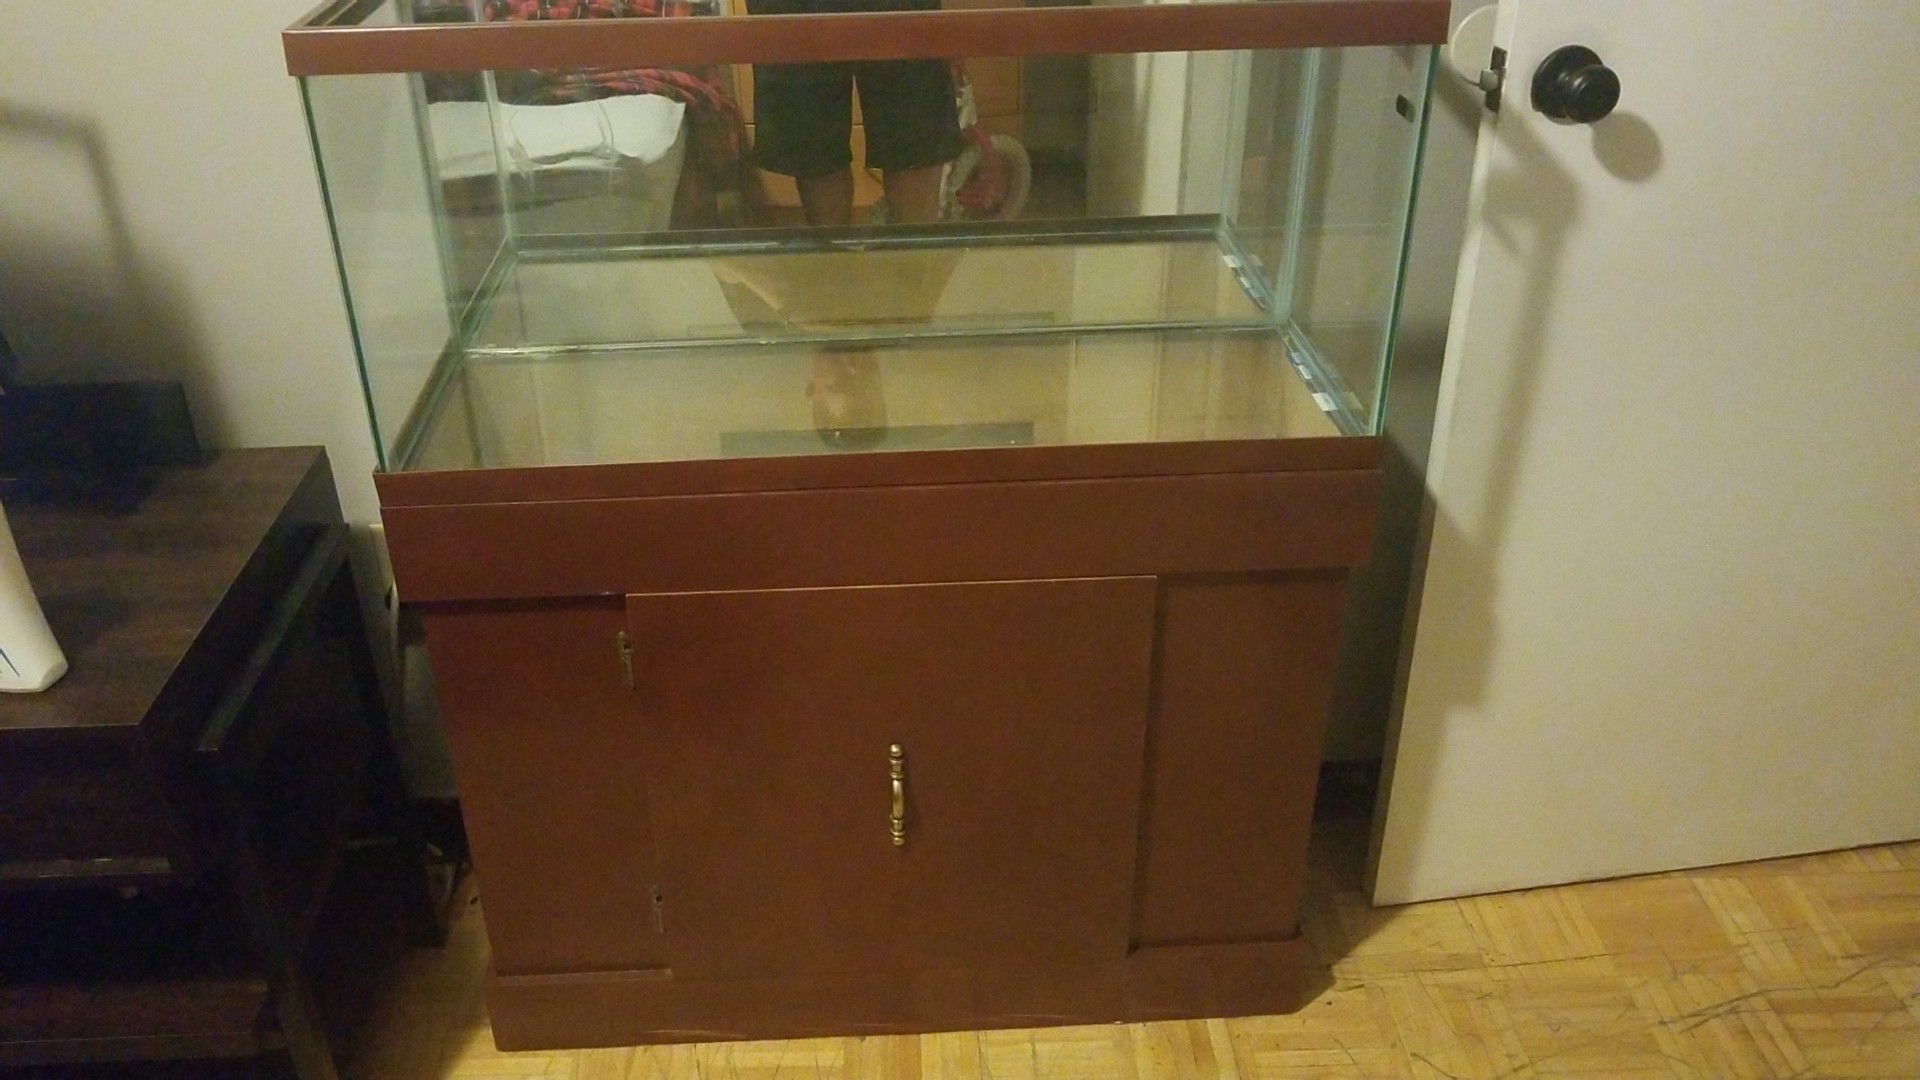 40 gallon fish tank and stand